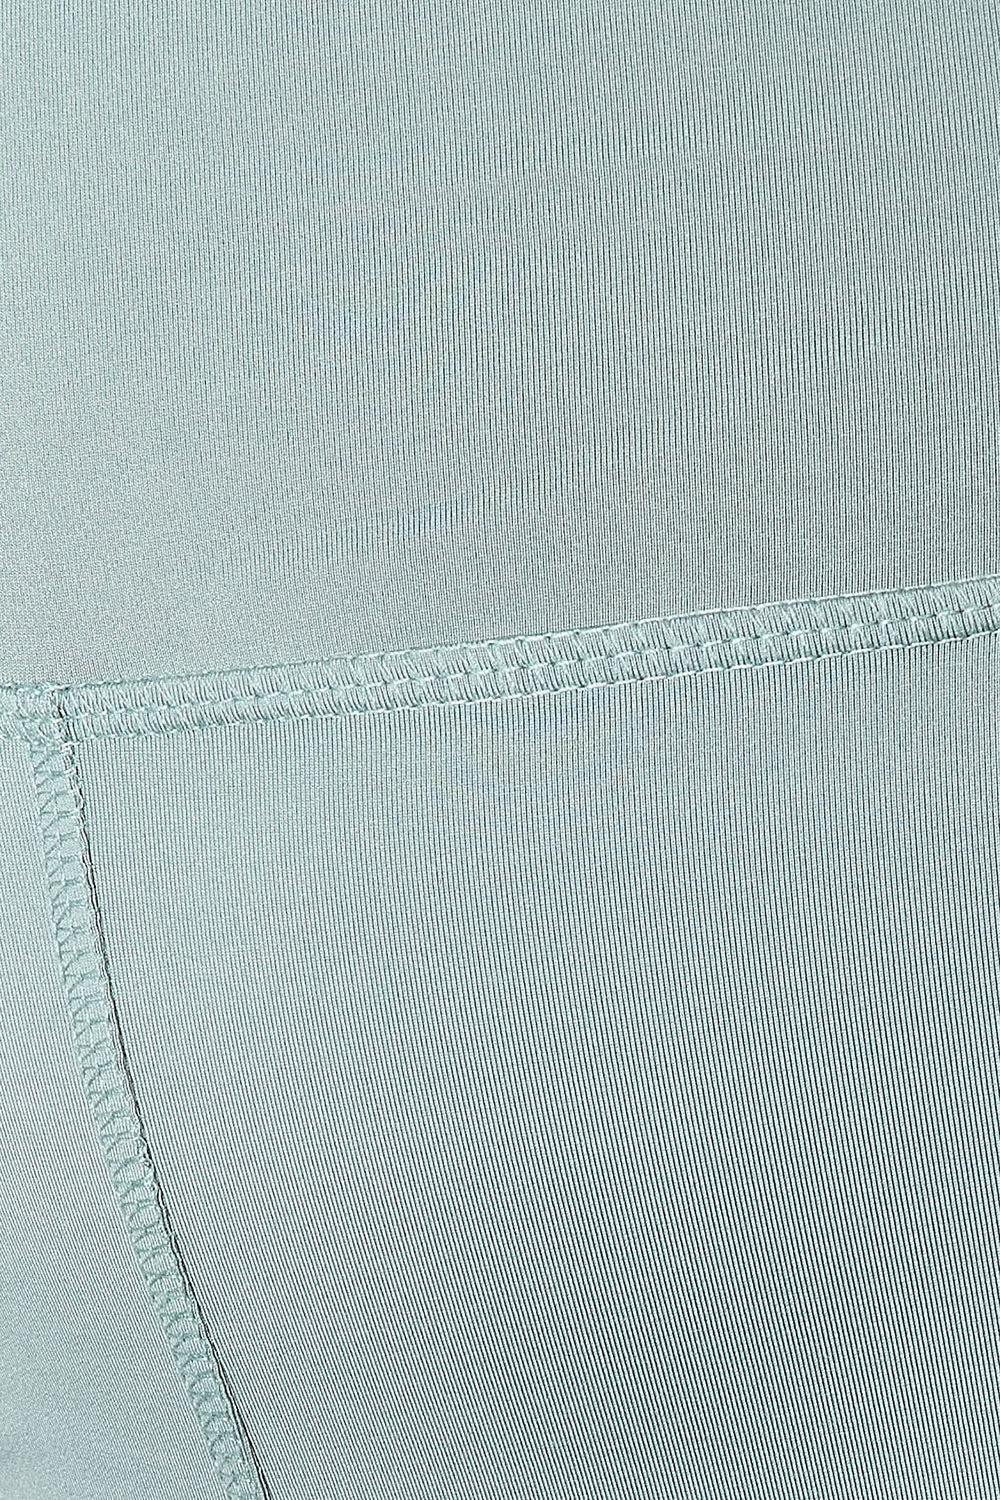 a close up of a person's pants with a pocket